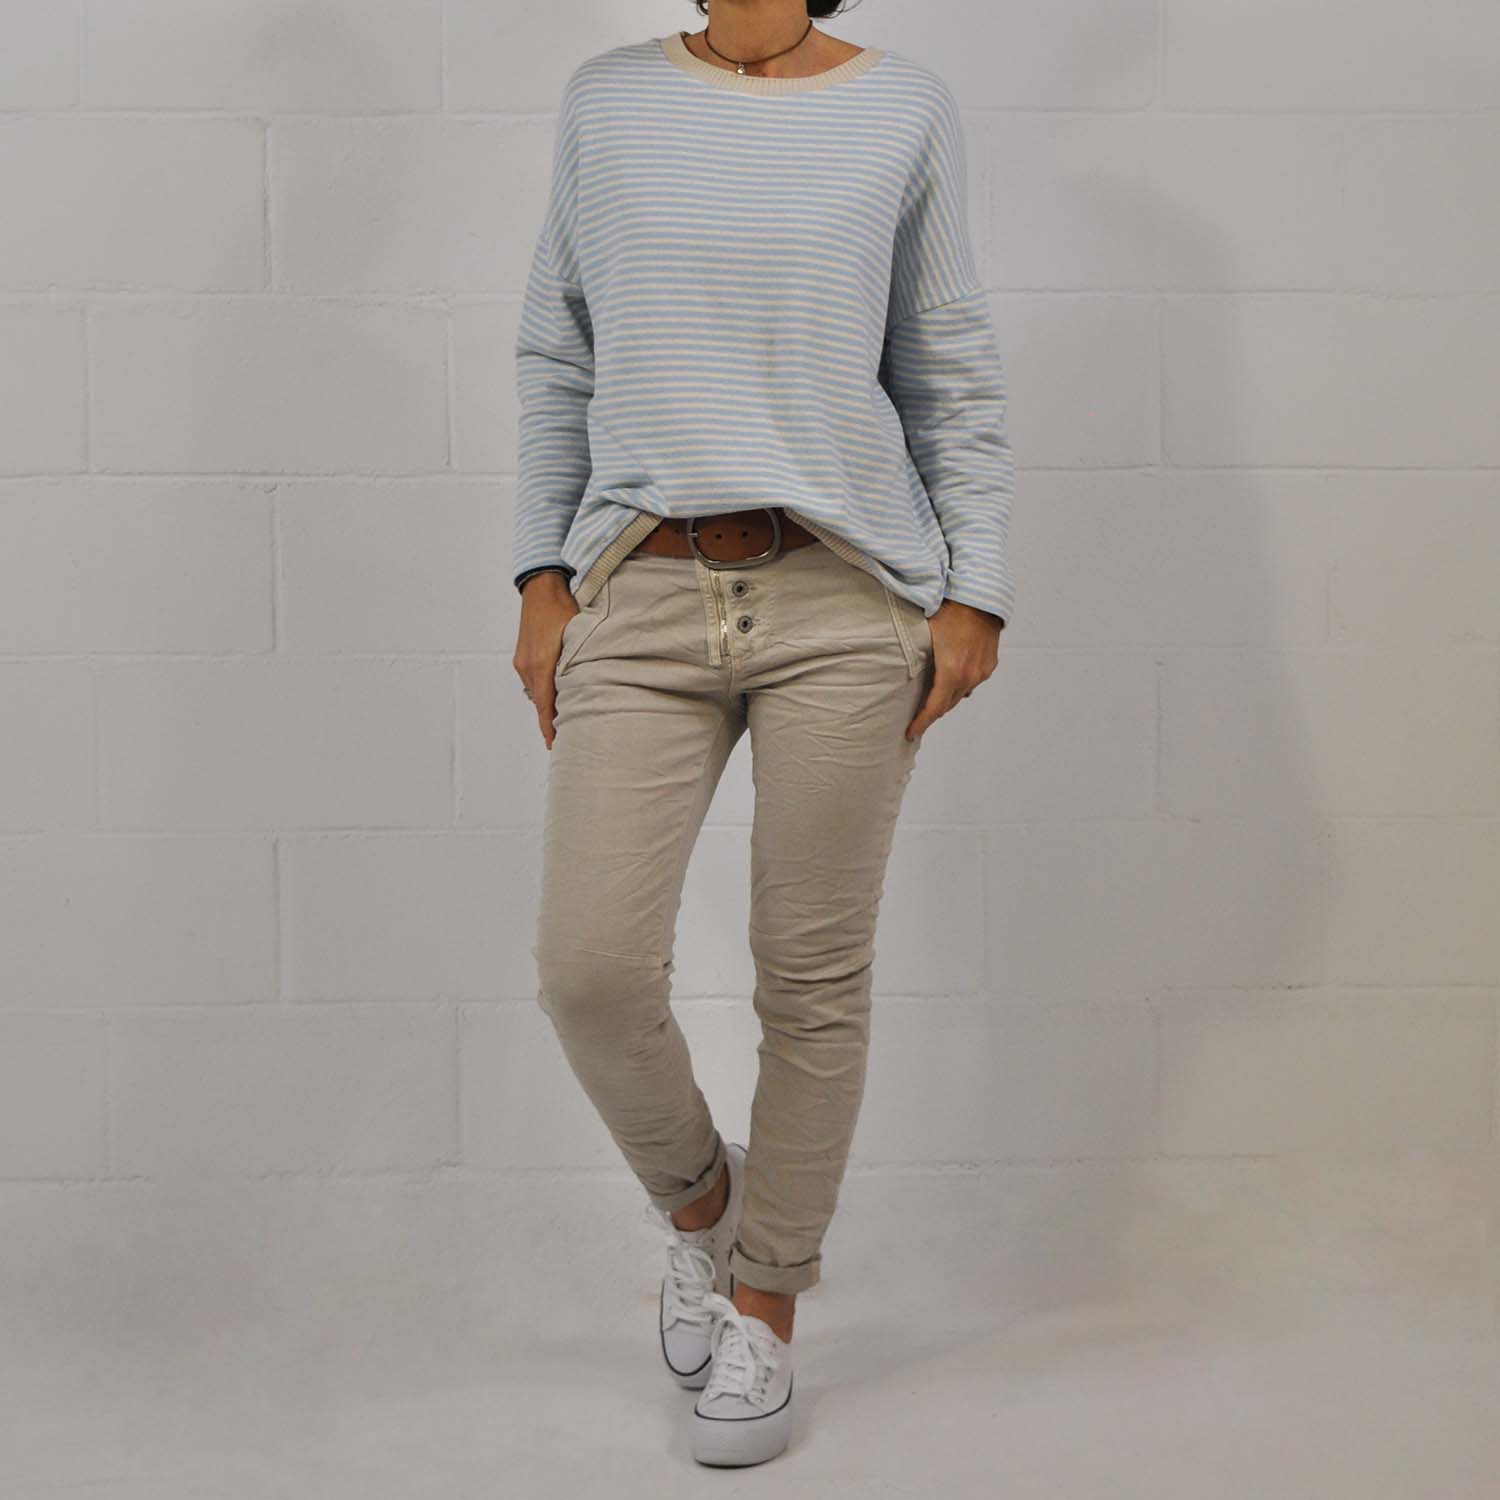 Beige zip and buttons pants